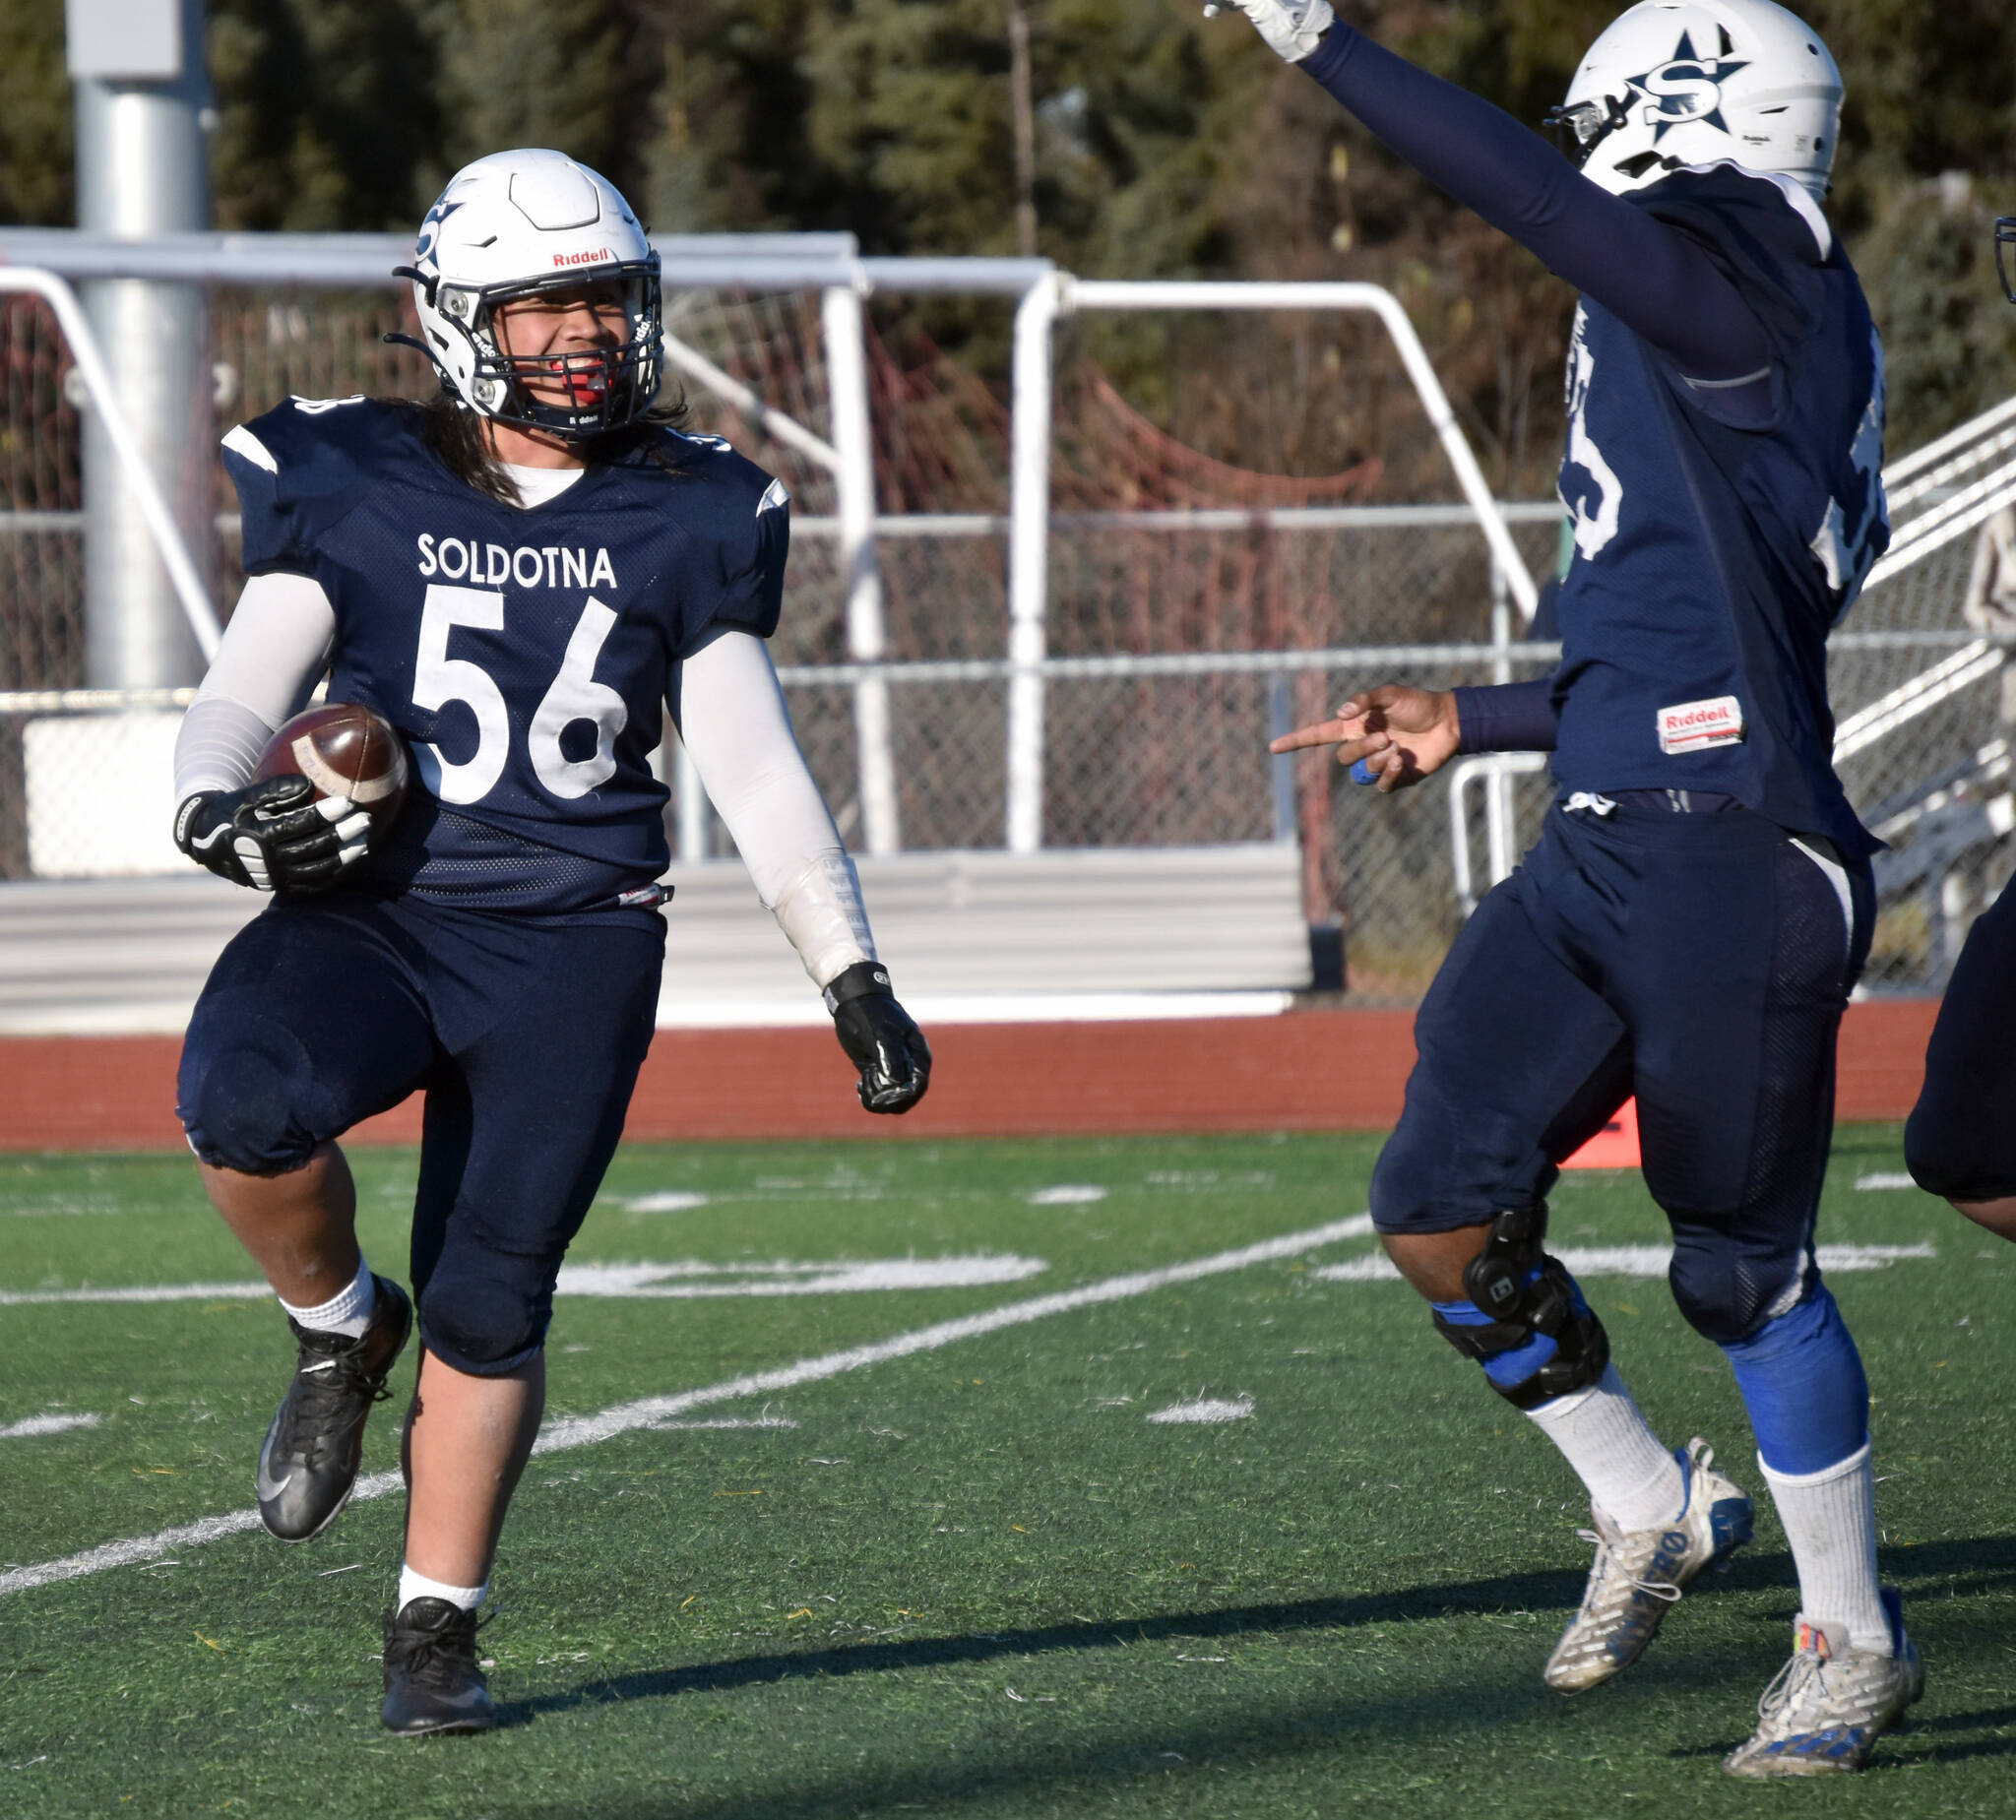 Soldotna’s Koda Lepule celebrates a fumble recovery with Elijah Lee on Saturday, Oct. 21, 2023, in the Division II championship game at Service High School in Anchorage, Alaska. (Photo by Jeff Helminiak/Peninsula Clarion)